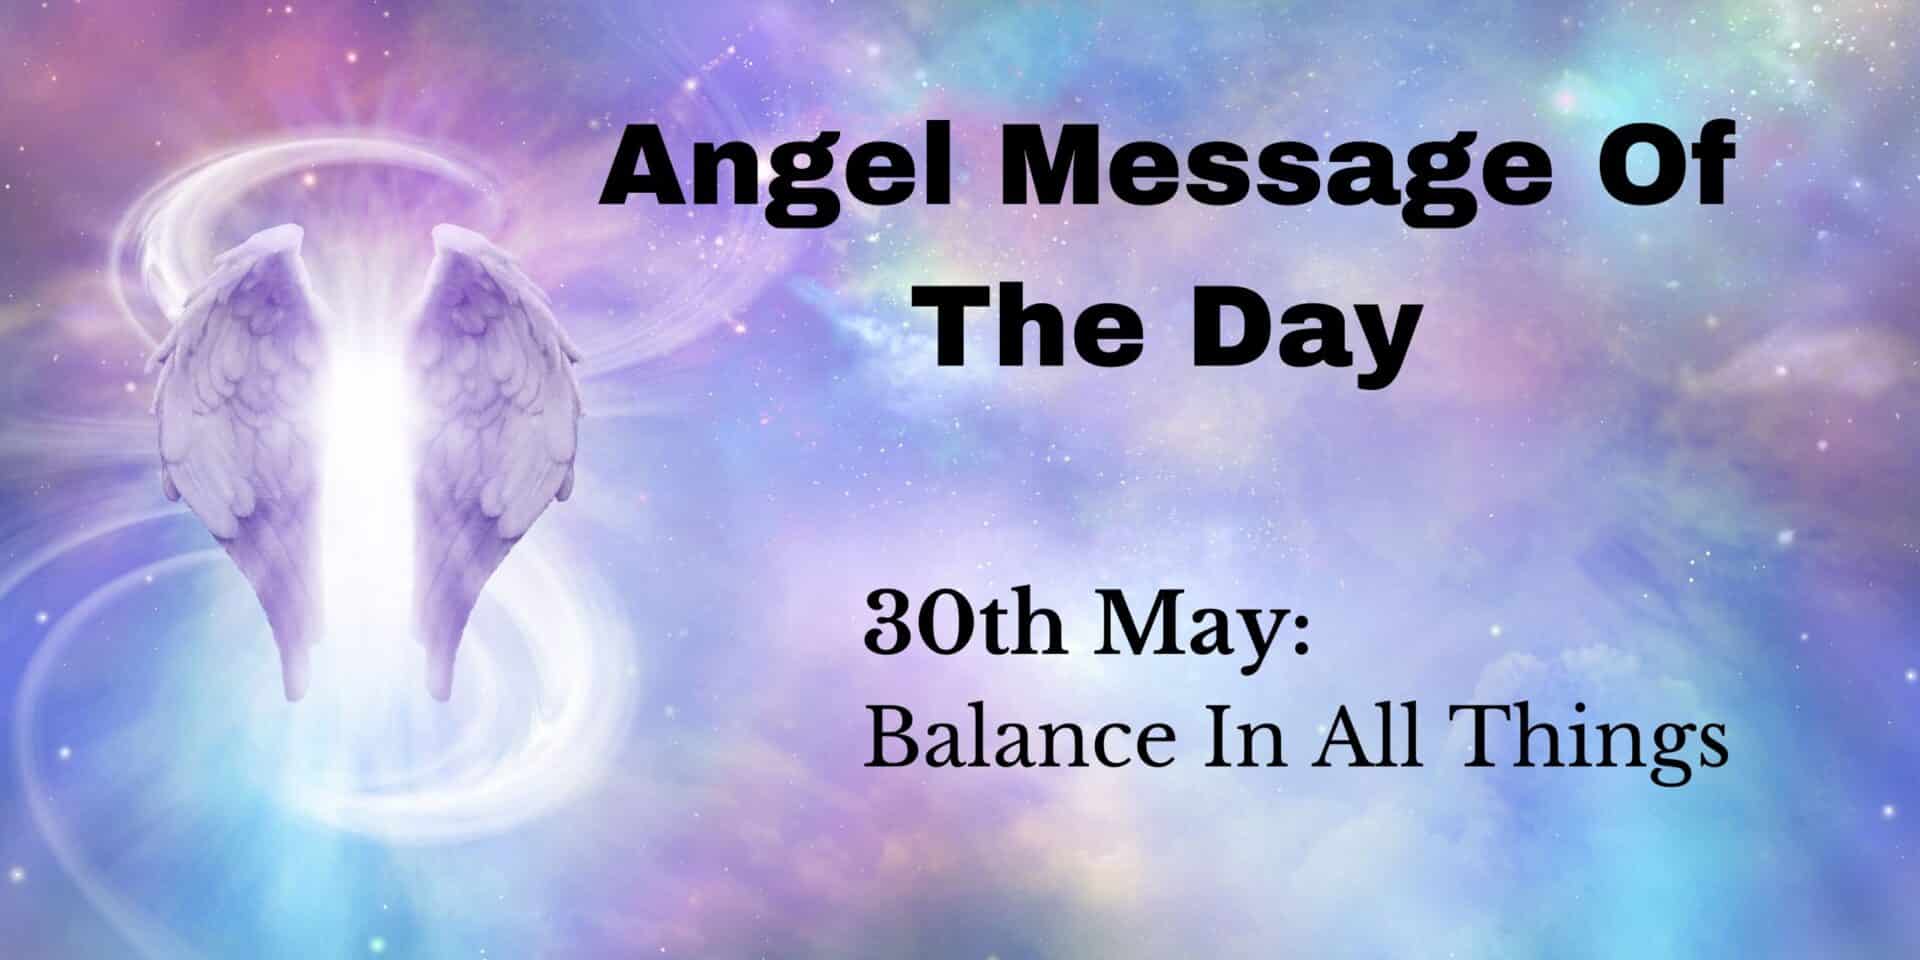 angel message of the day : balance in all things